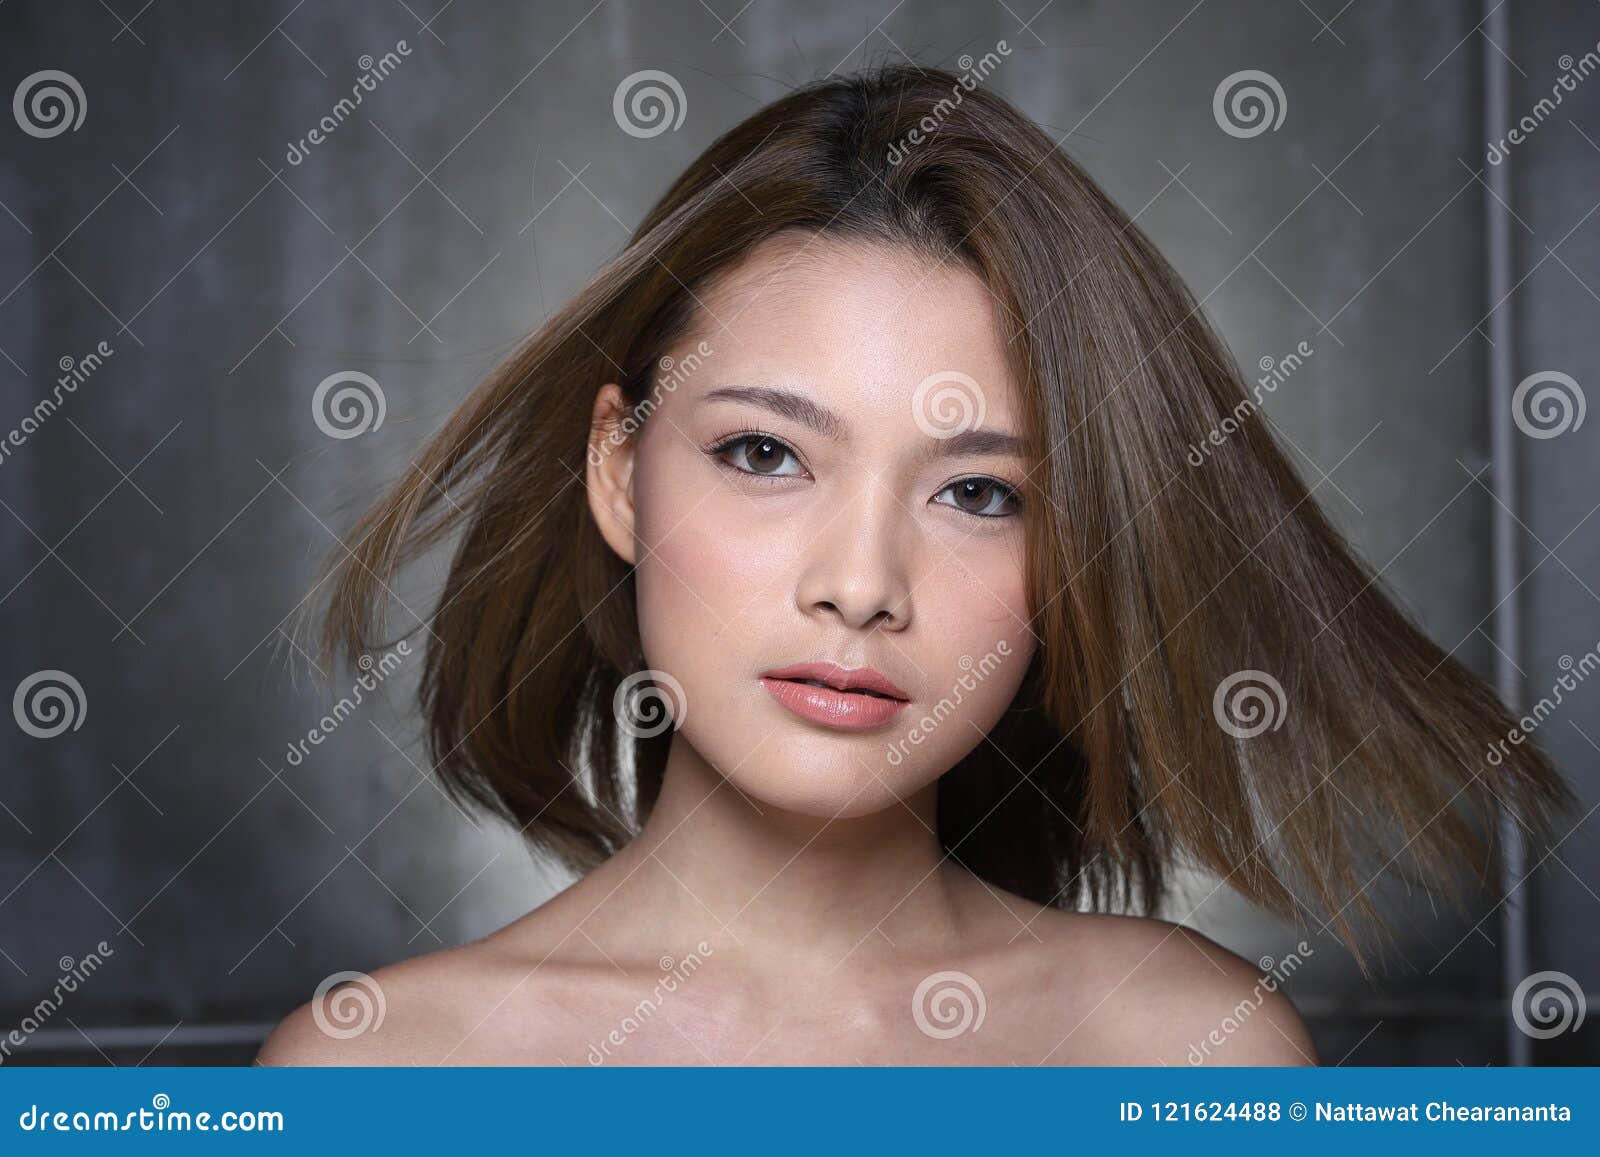 an make hairstyle asian how to